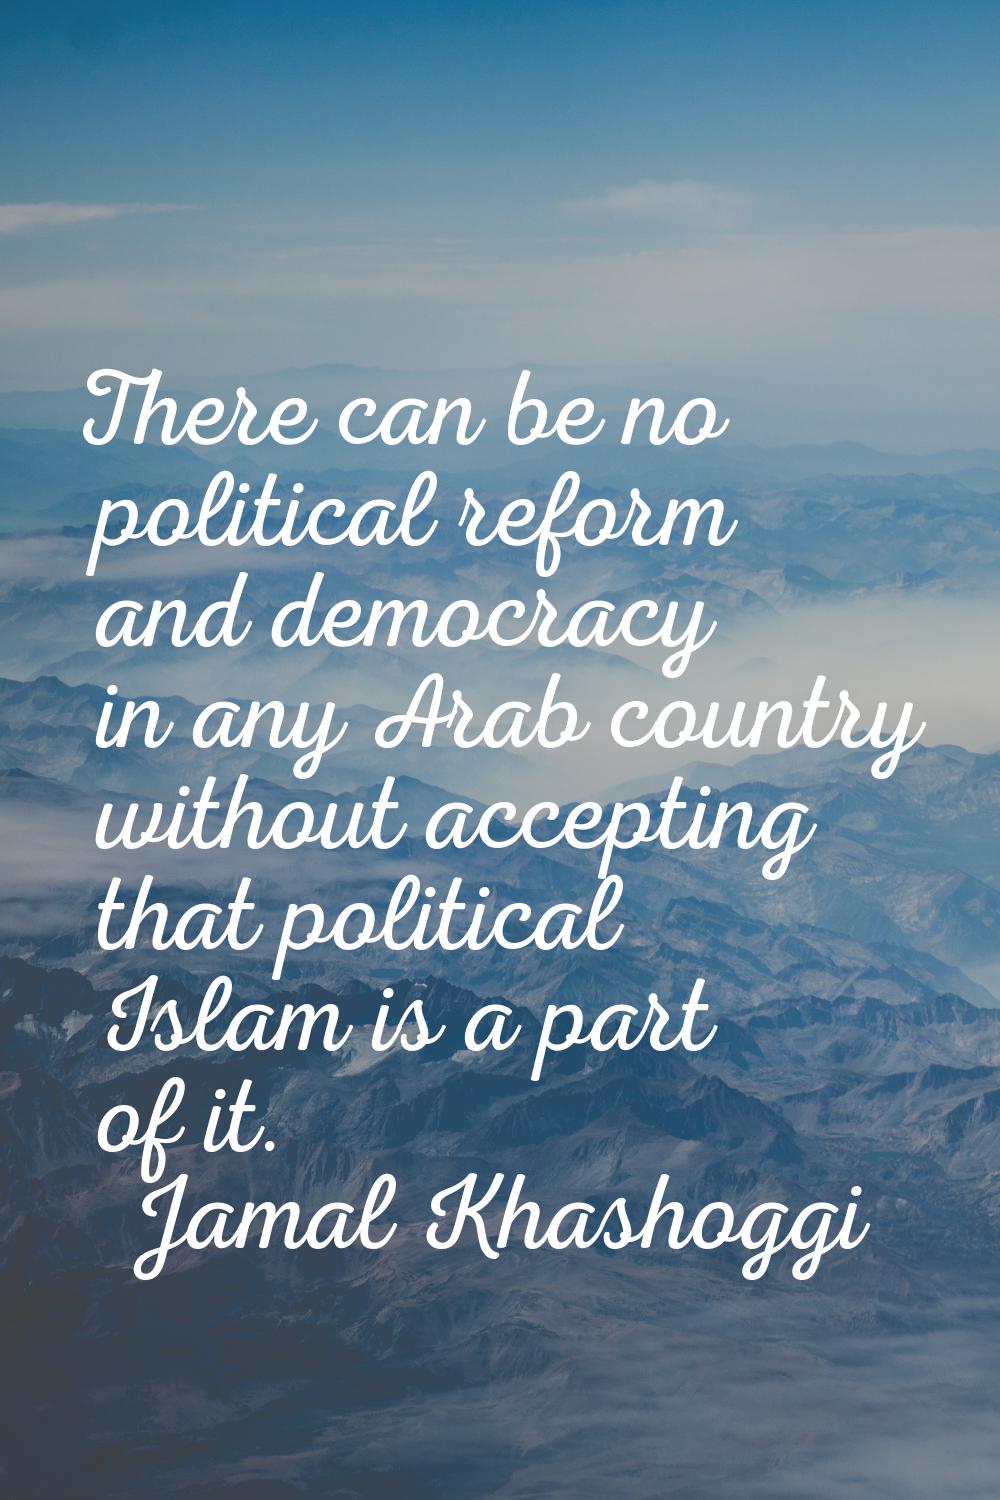 There can be no political reform and democracy in any Arab country without accepting that political